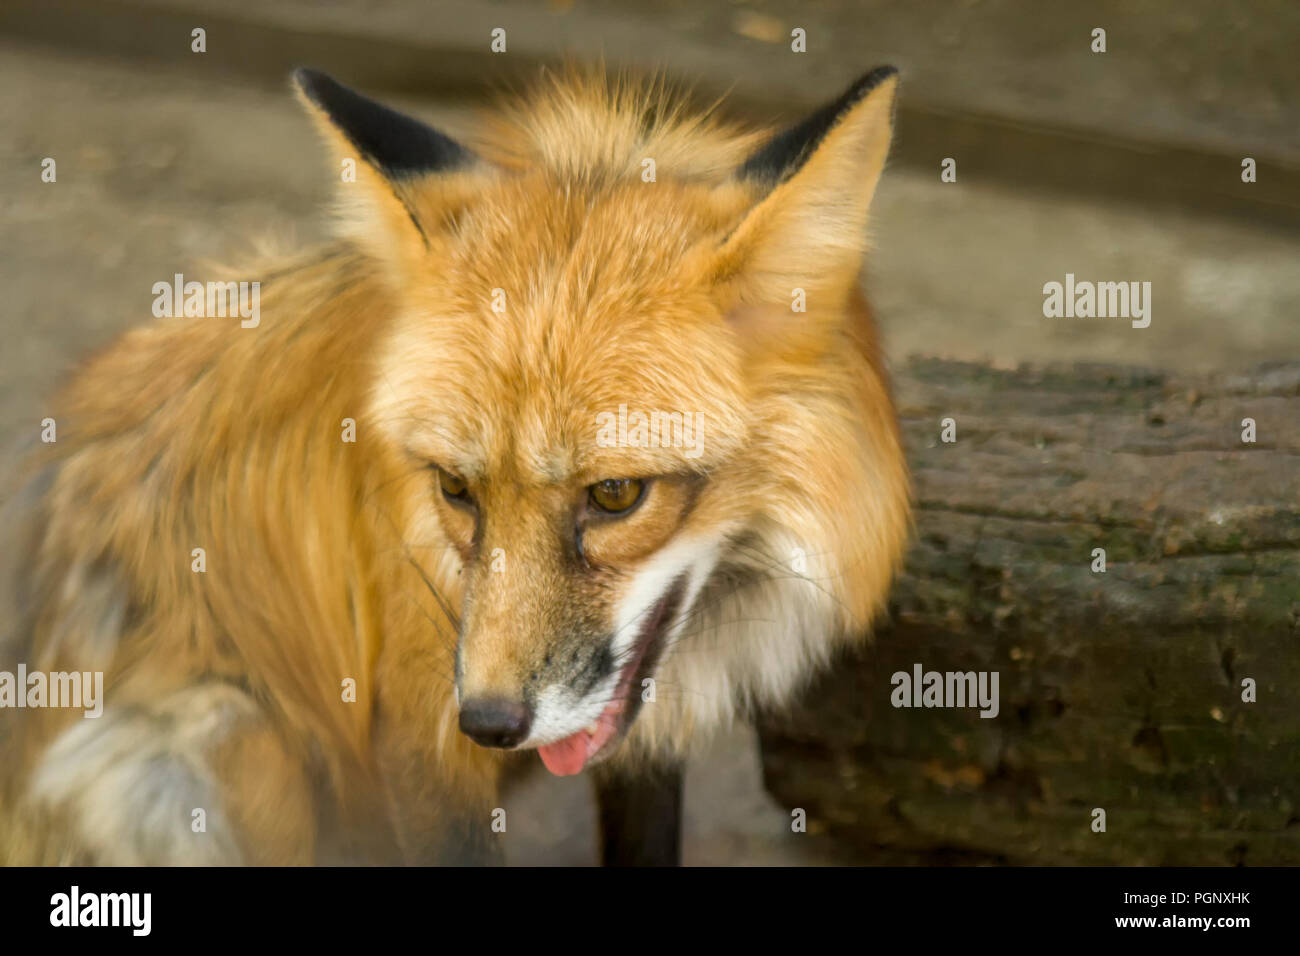 Fox close-up portrait. Foxes are small-to-medium-sized, omnivorous mammals belonging to several genera of the family Canidae. Foxes have a flattened s Stock Photo